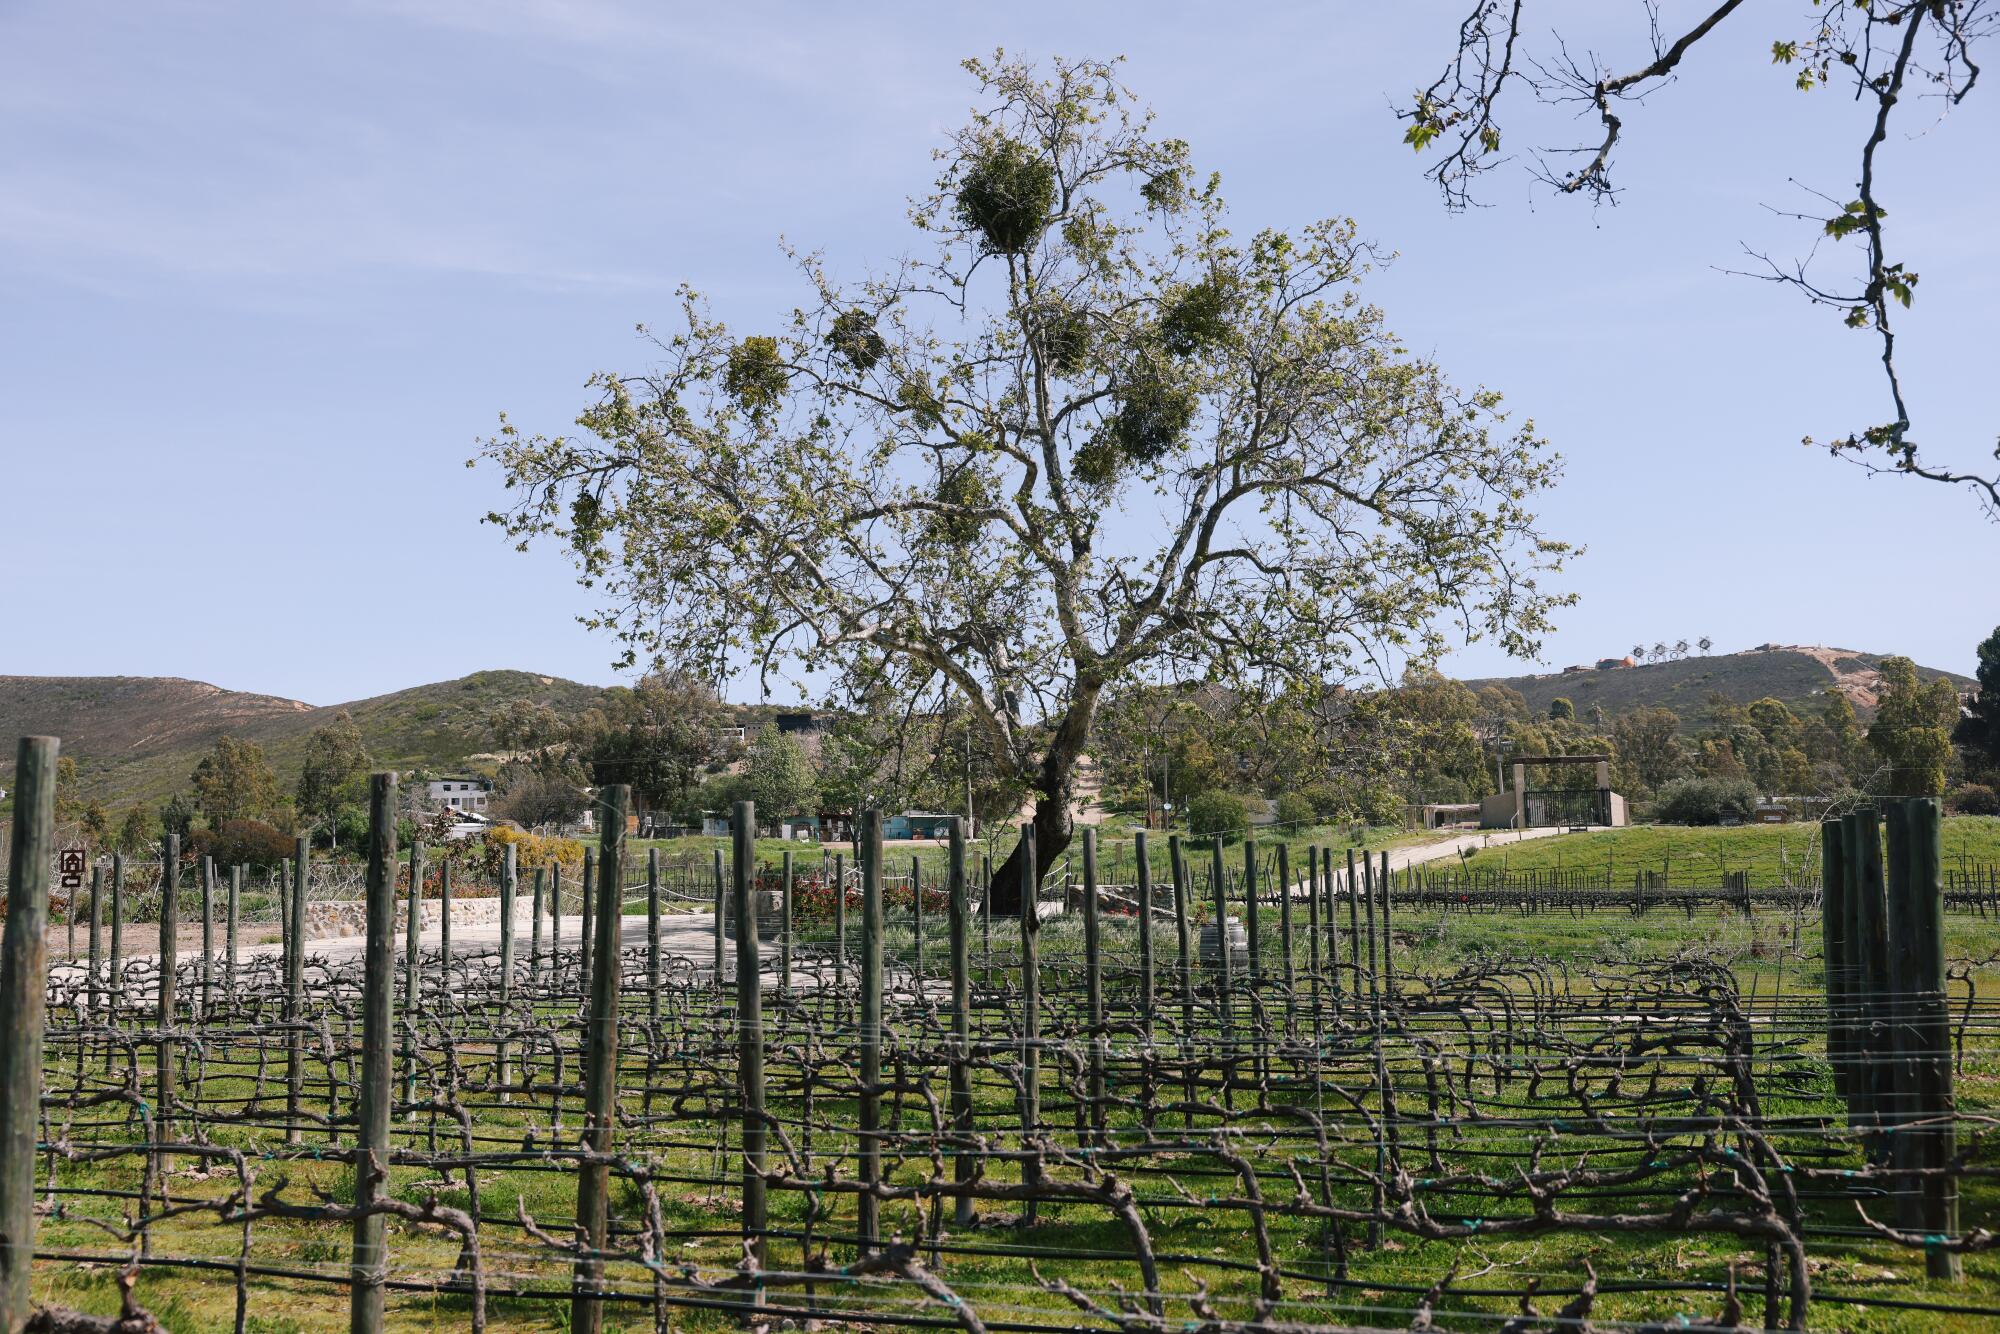 A tree surrounded by a vineyard of Cabernet grapes.